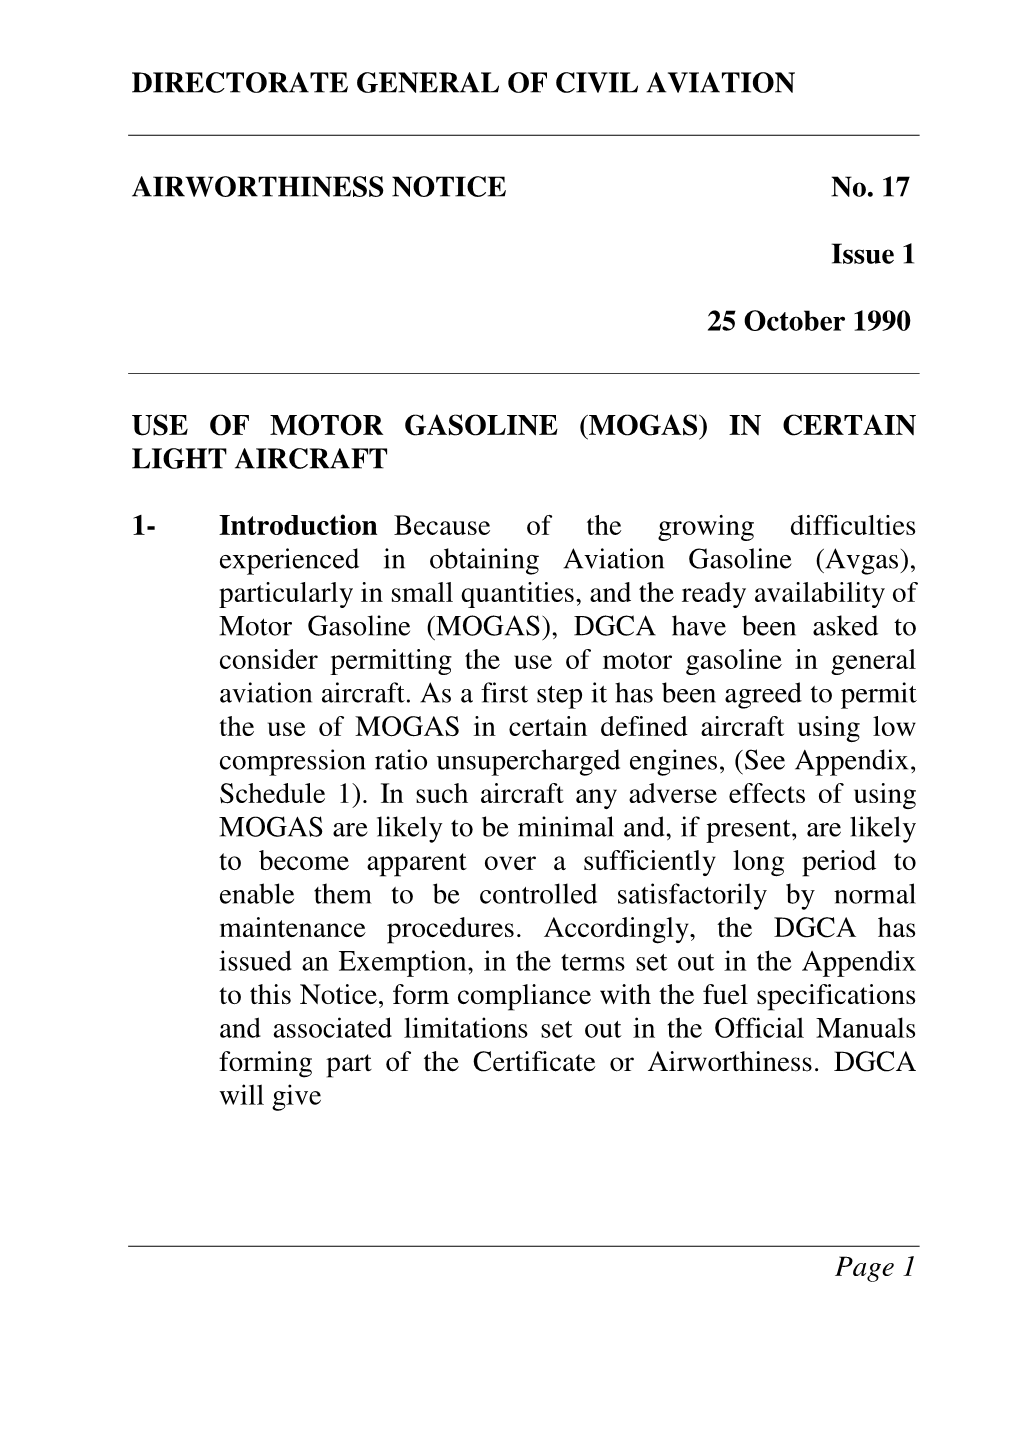 DIRECTORATE GENERAL of CIVIL AVIATION AIRWORTHINESS NOTICE No. 17 Issue 1 25 October 1990 USE of MOTOR GASOLINE (MOGAS) in CERT